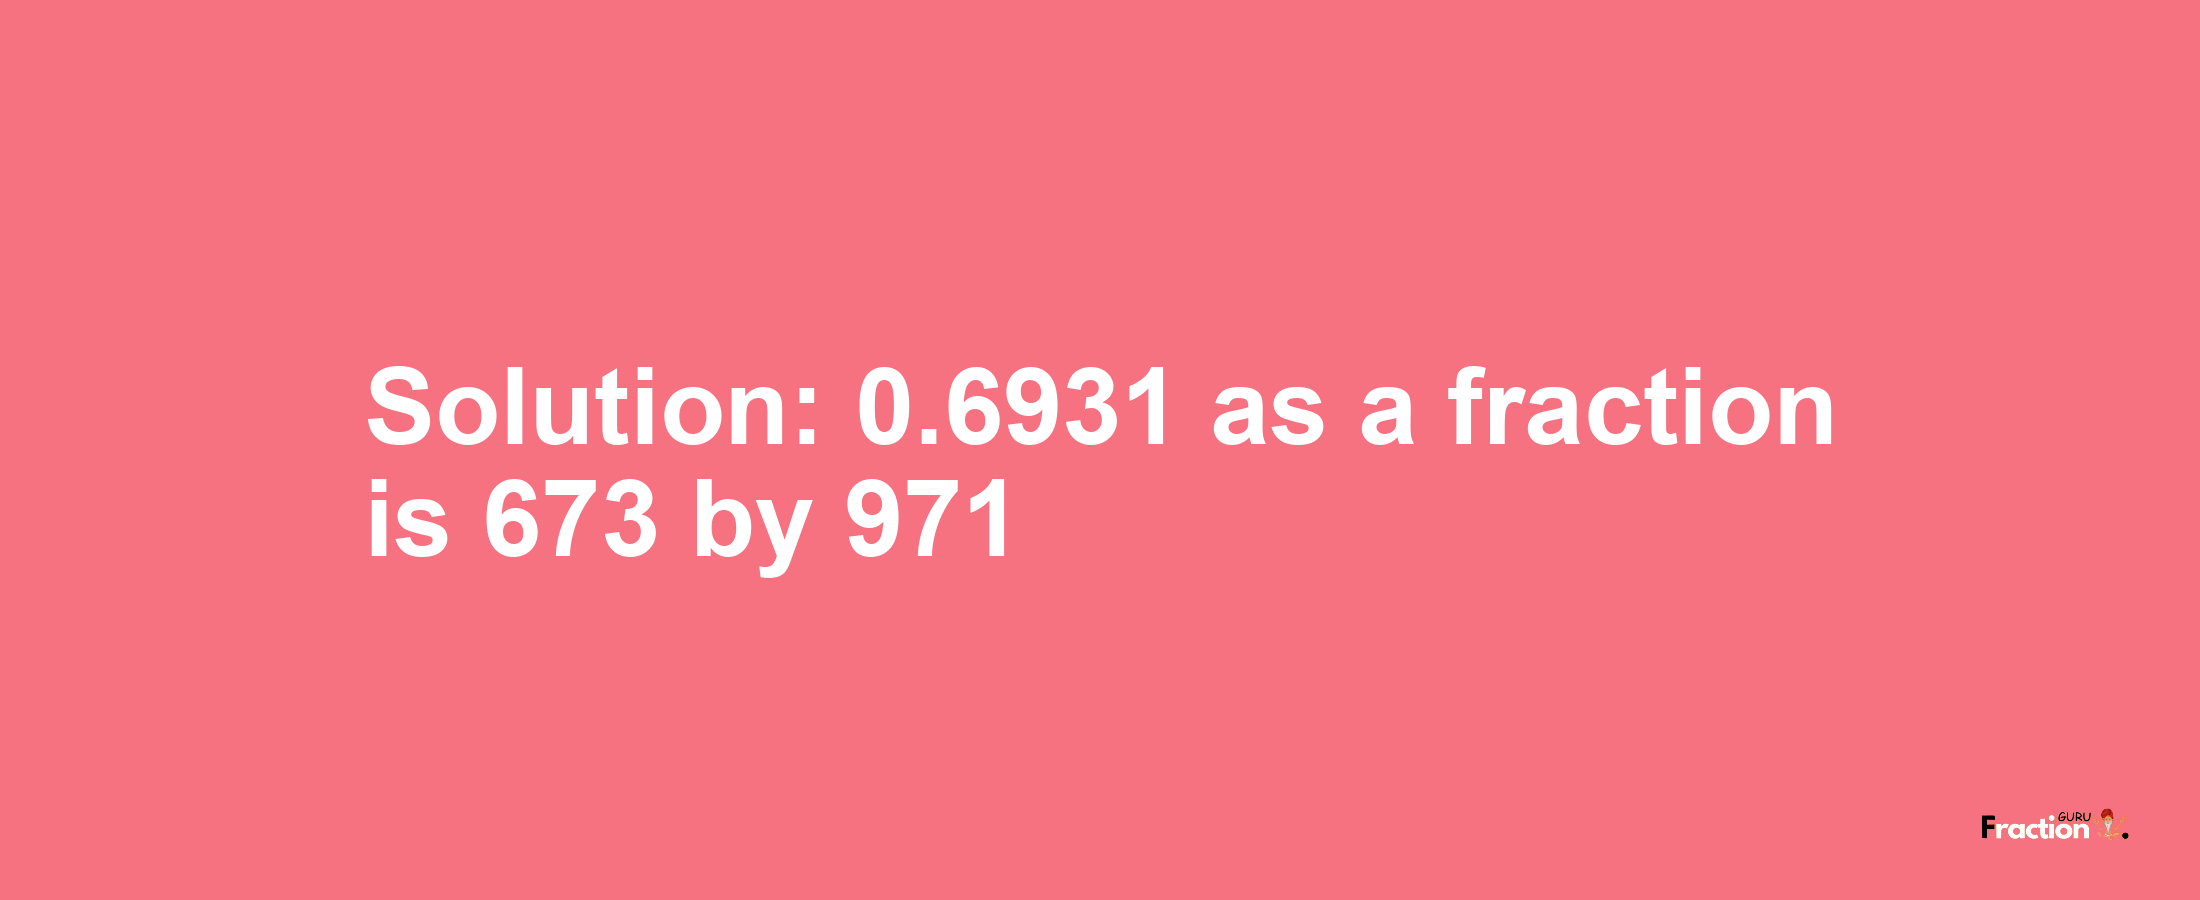 Solution:0.6931 as a fraction is 673/971